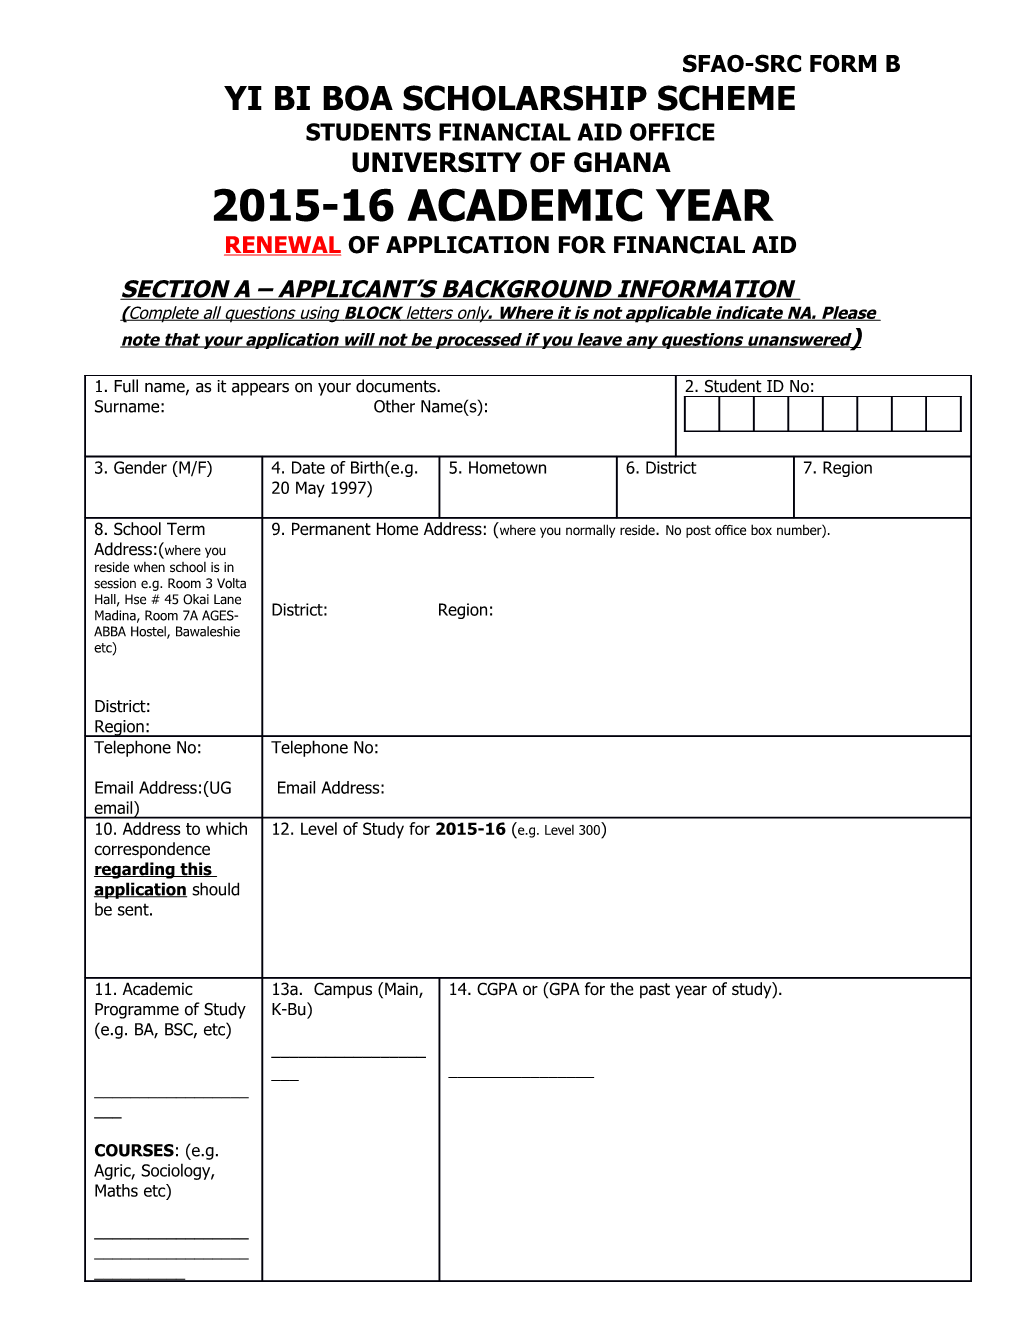 Application for Student Financial Aid